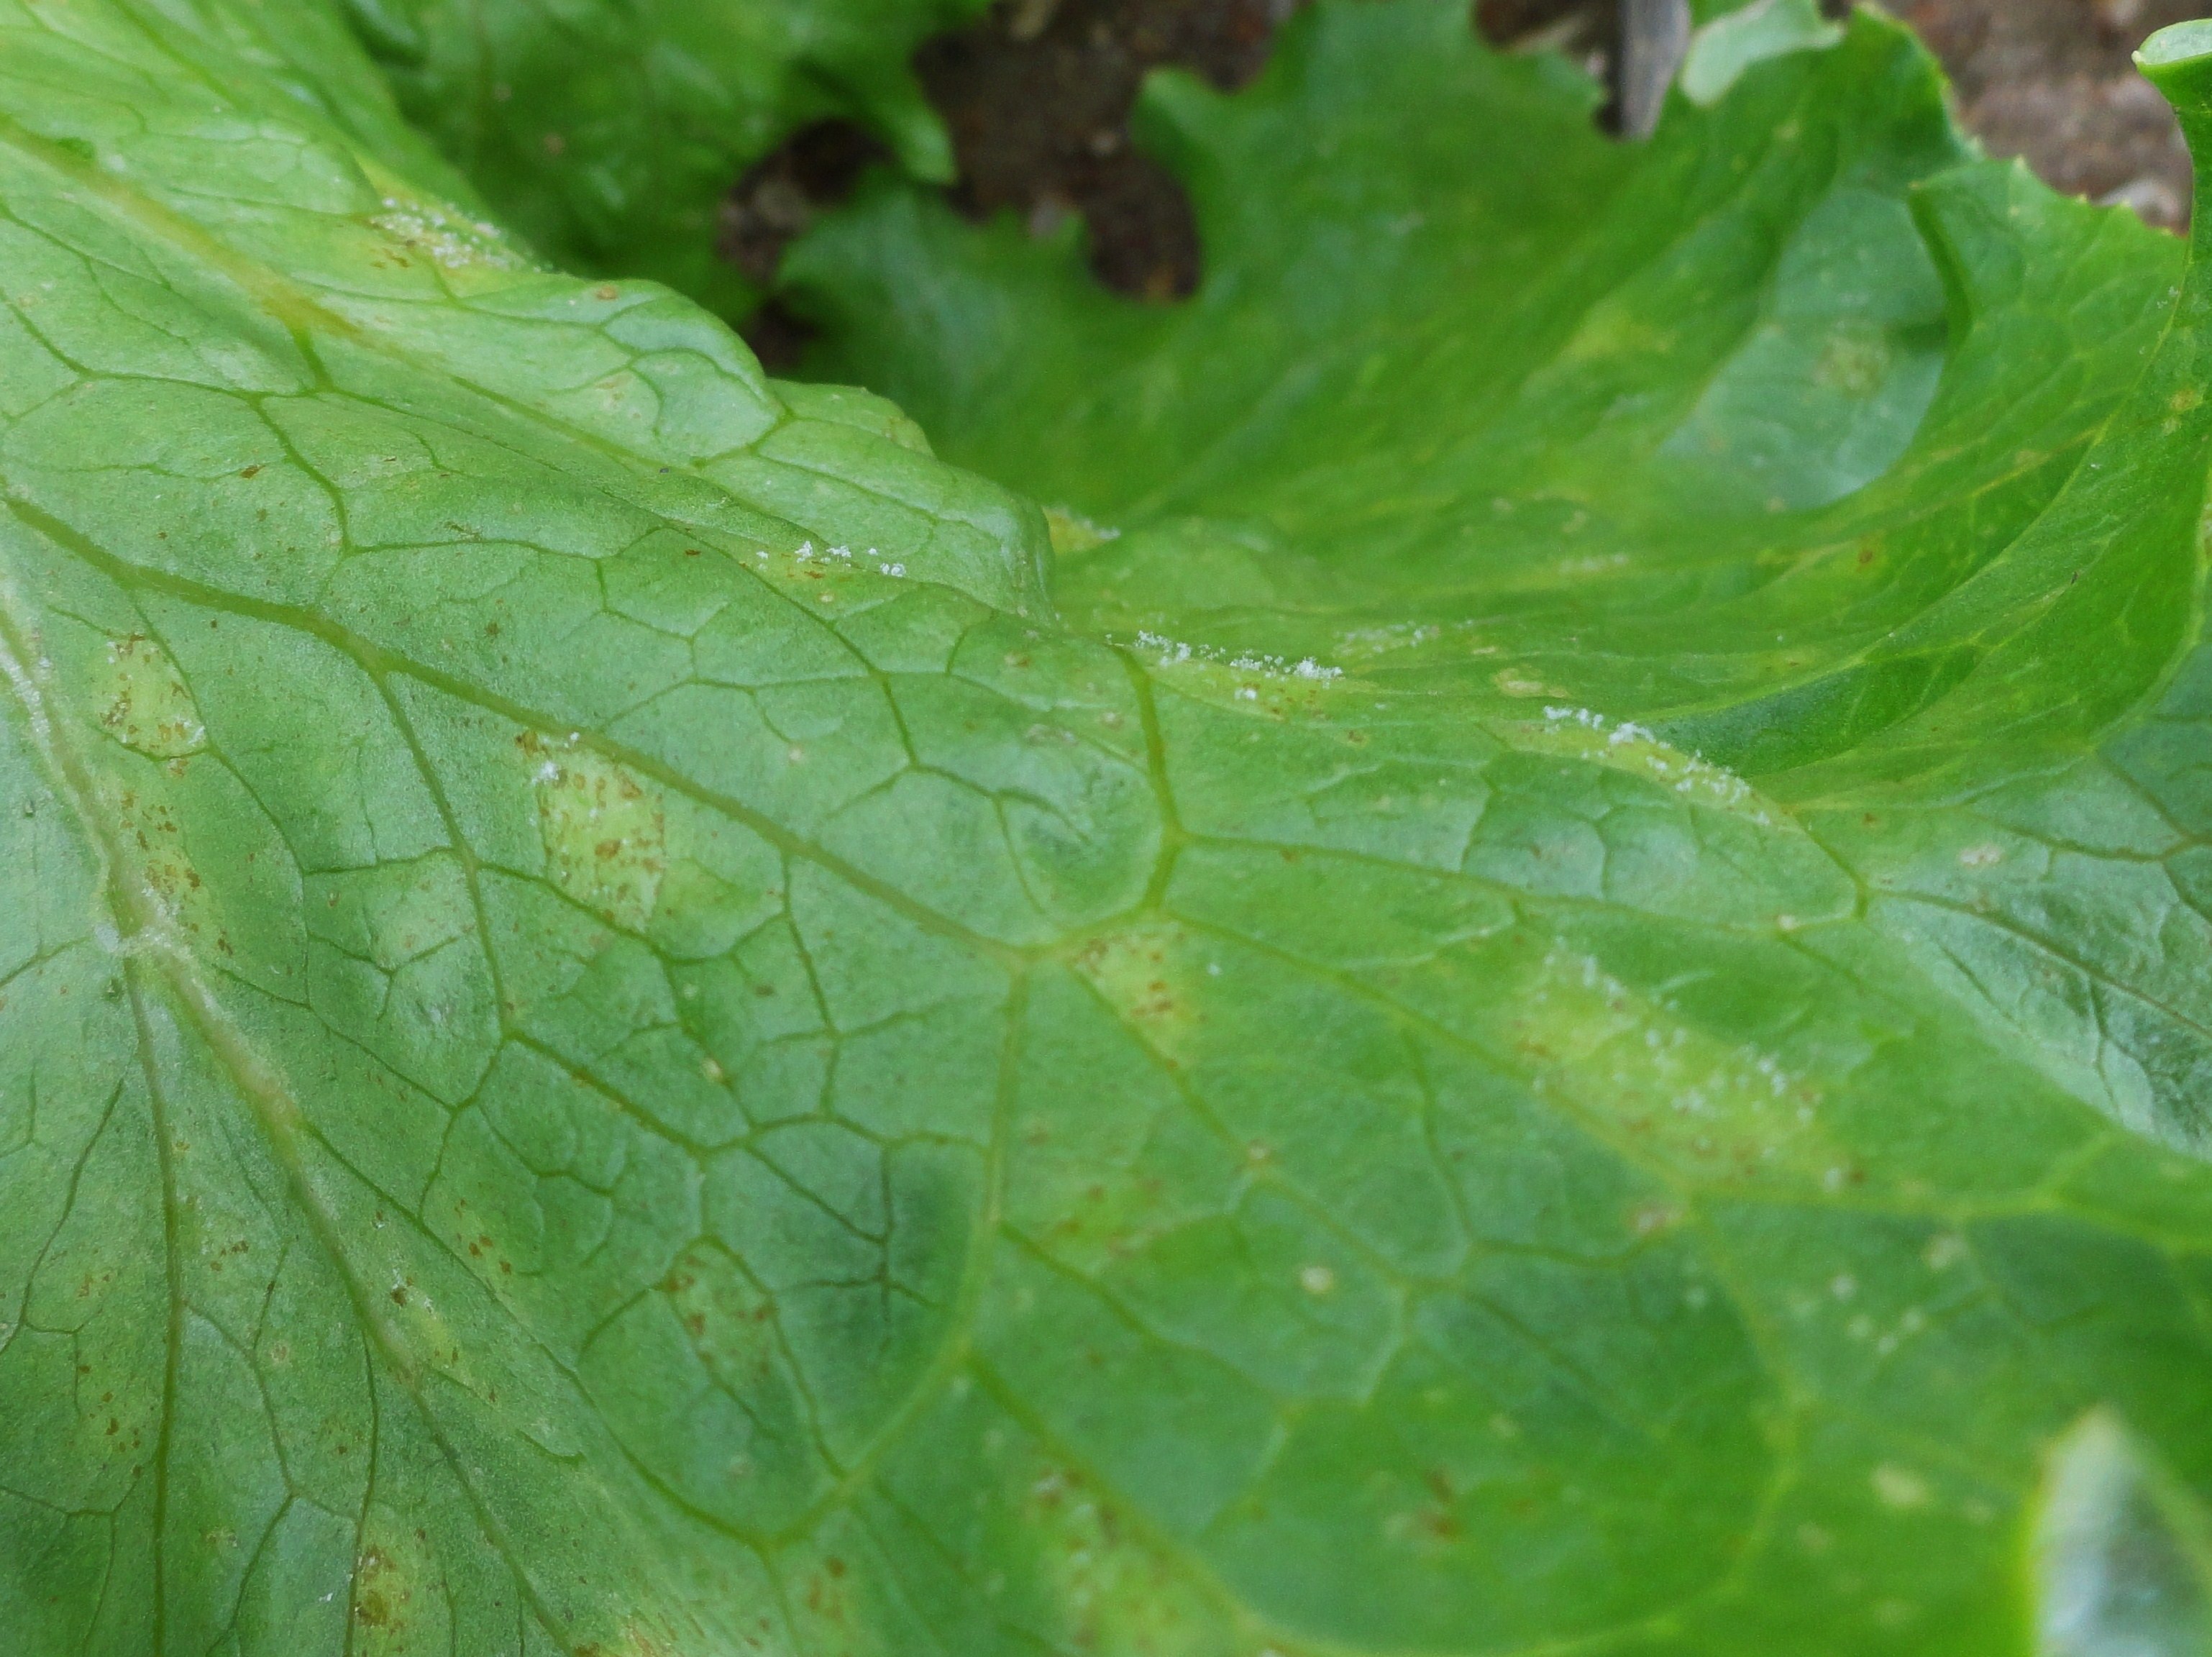 <p><b>Initial symptoms of leaf downy mildew represented by yellowed and angular areas.</b></p><p>Autor: Jesus G. Tofoli</p>